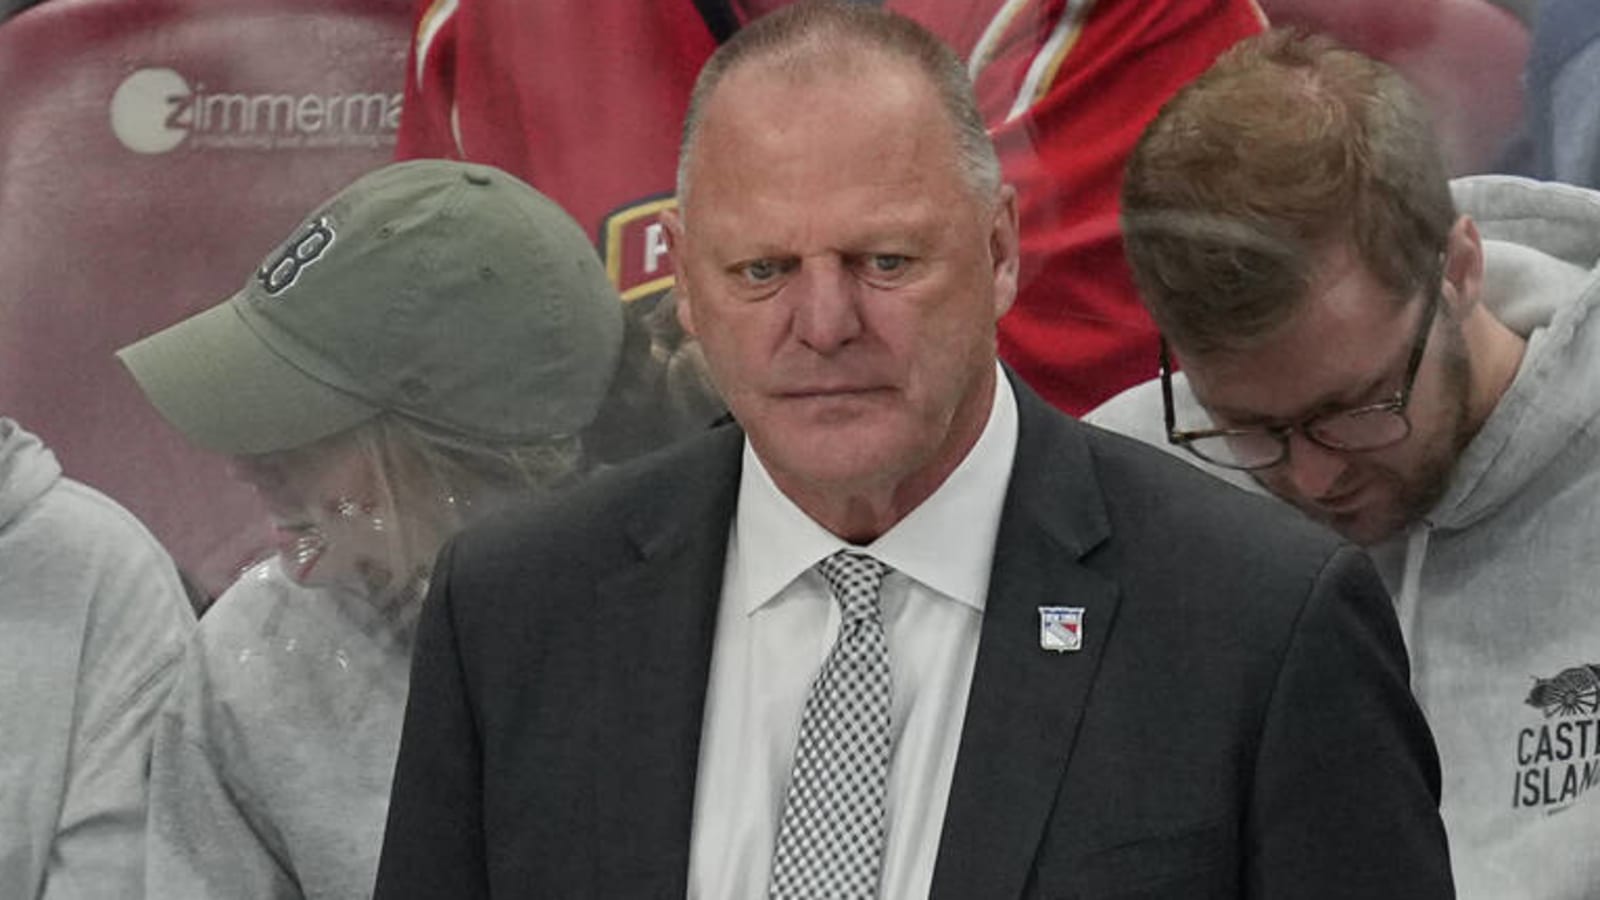 What Are the Maple Leafs Saying by Not Interviewing Gerard Gallant? 